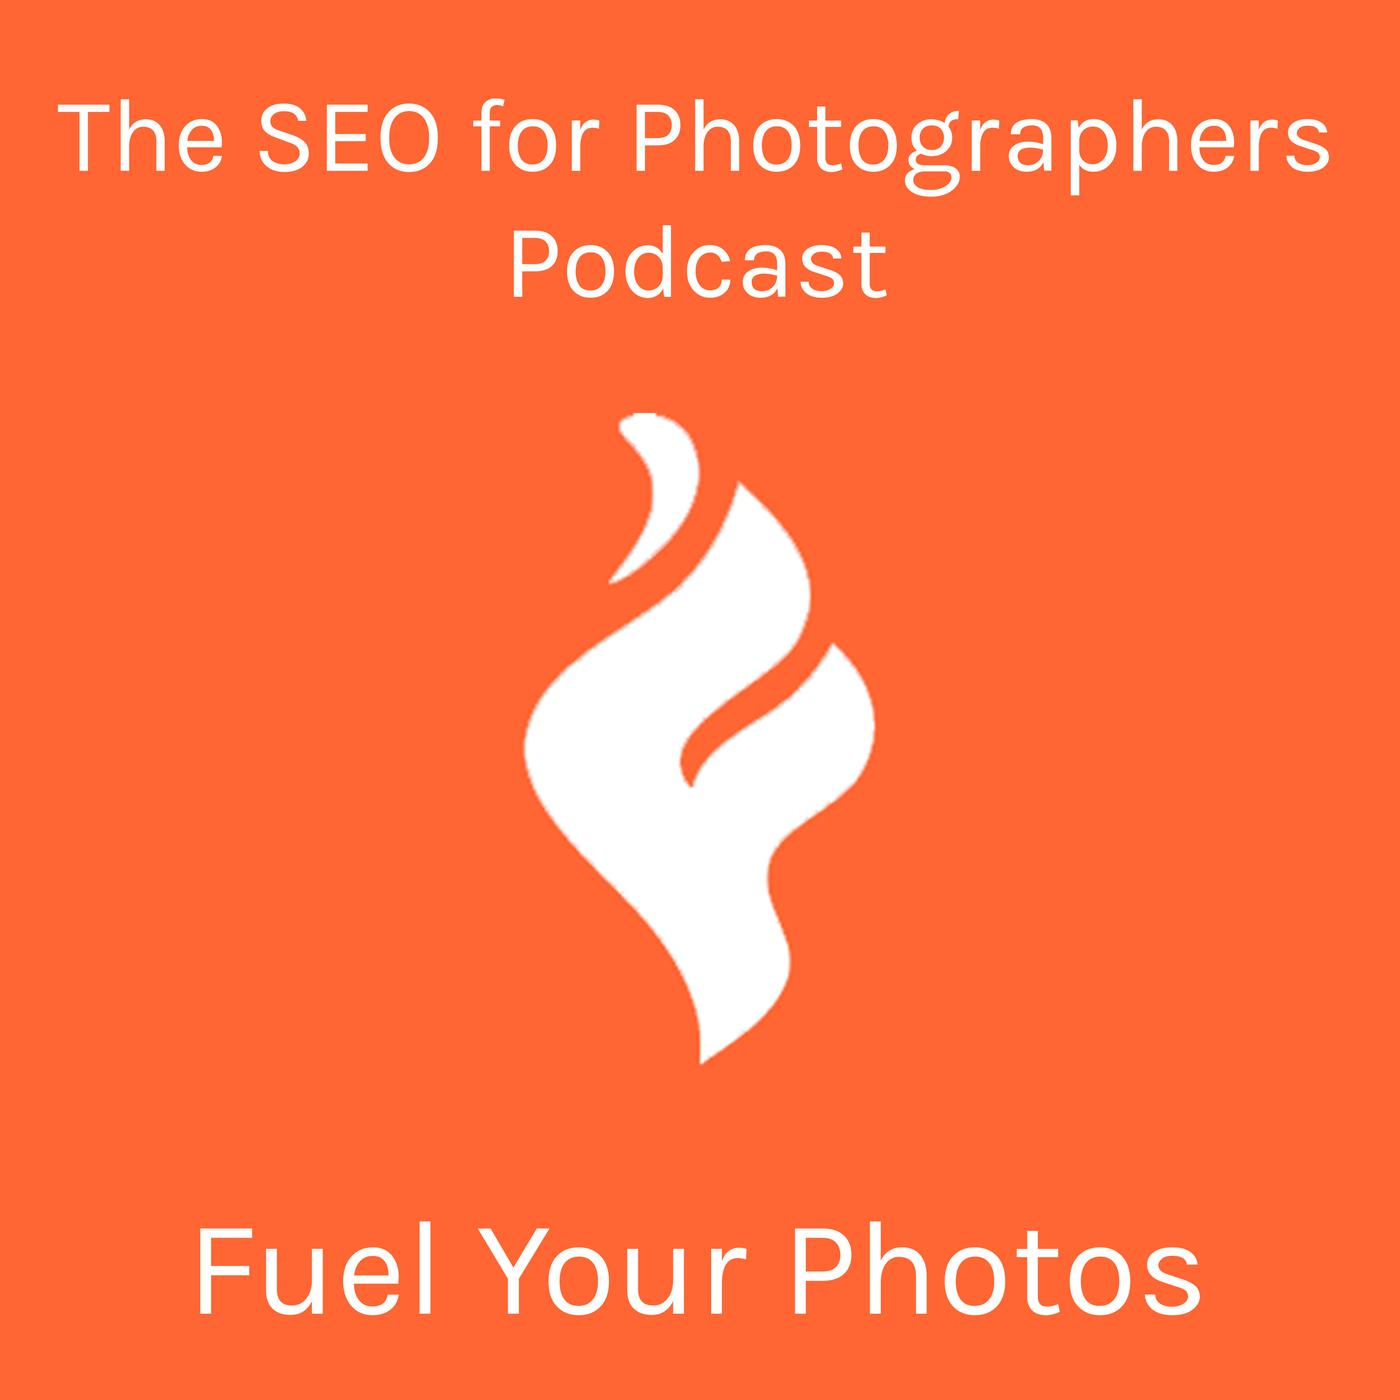 Drawing of a flame. Overlay text "The SEO for Photographers Podcast, Fuel your photos"